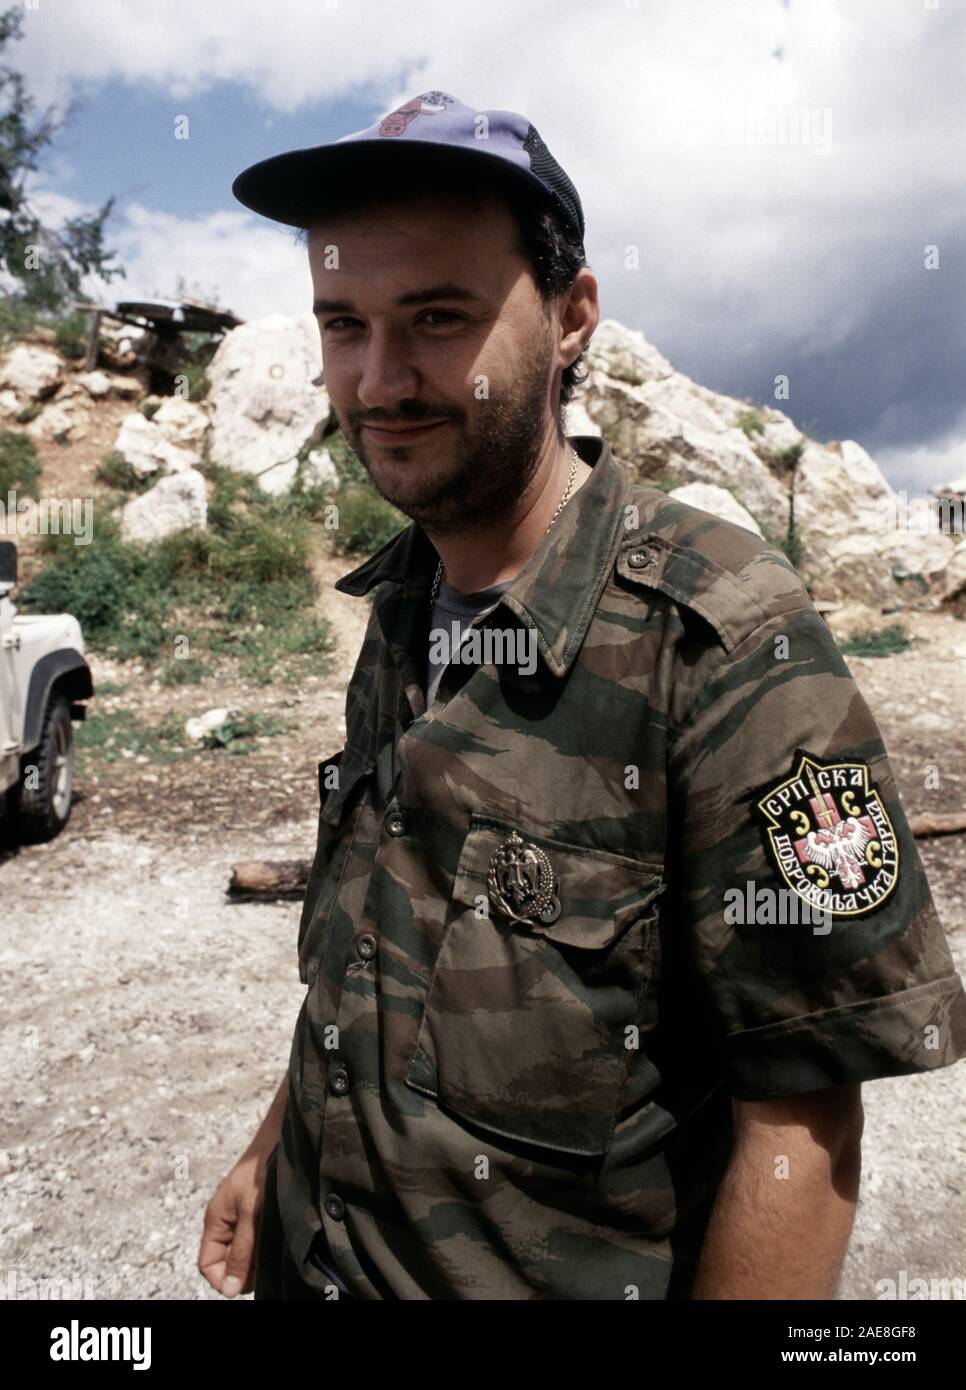 11th August 1993 During the Siege of Sarajevo: a Bosnian-Serb soldier outside his bunker on Mount Trebevic, above Sarajevo. He wears the shoulder patch of the Serb Volunteer Guard (Srpska dobrovoljačka garda or SDG), also known as Arkan’s Tigers, and the badge of the Serbian Army of Krajina. Stock Photo